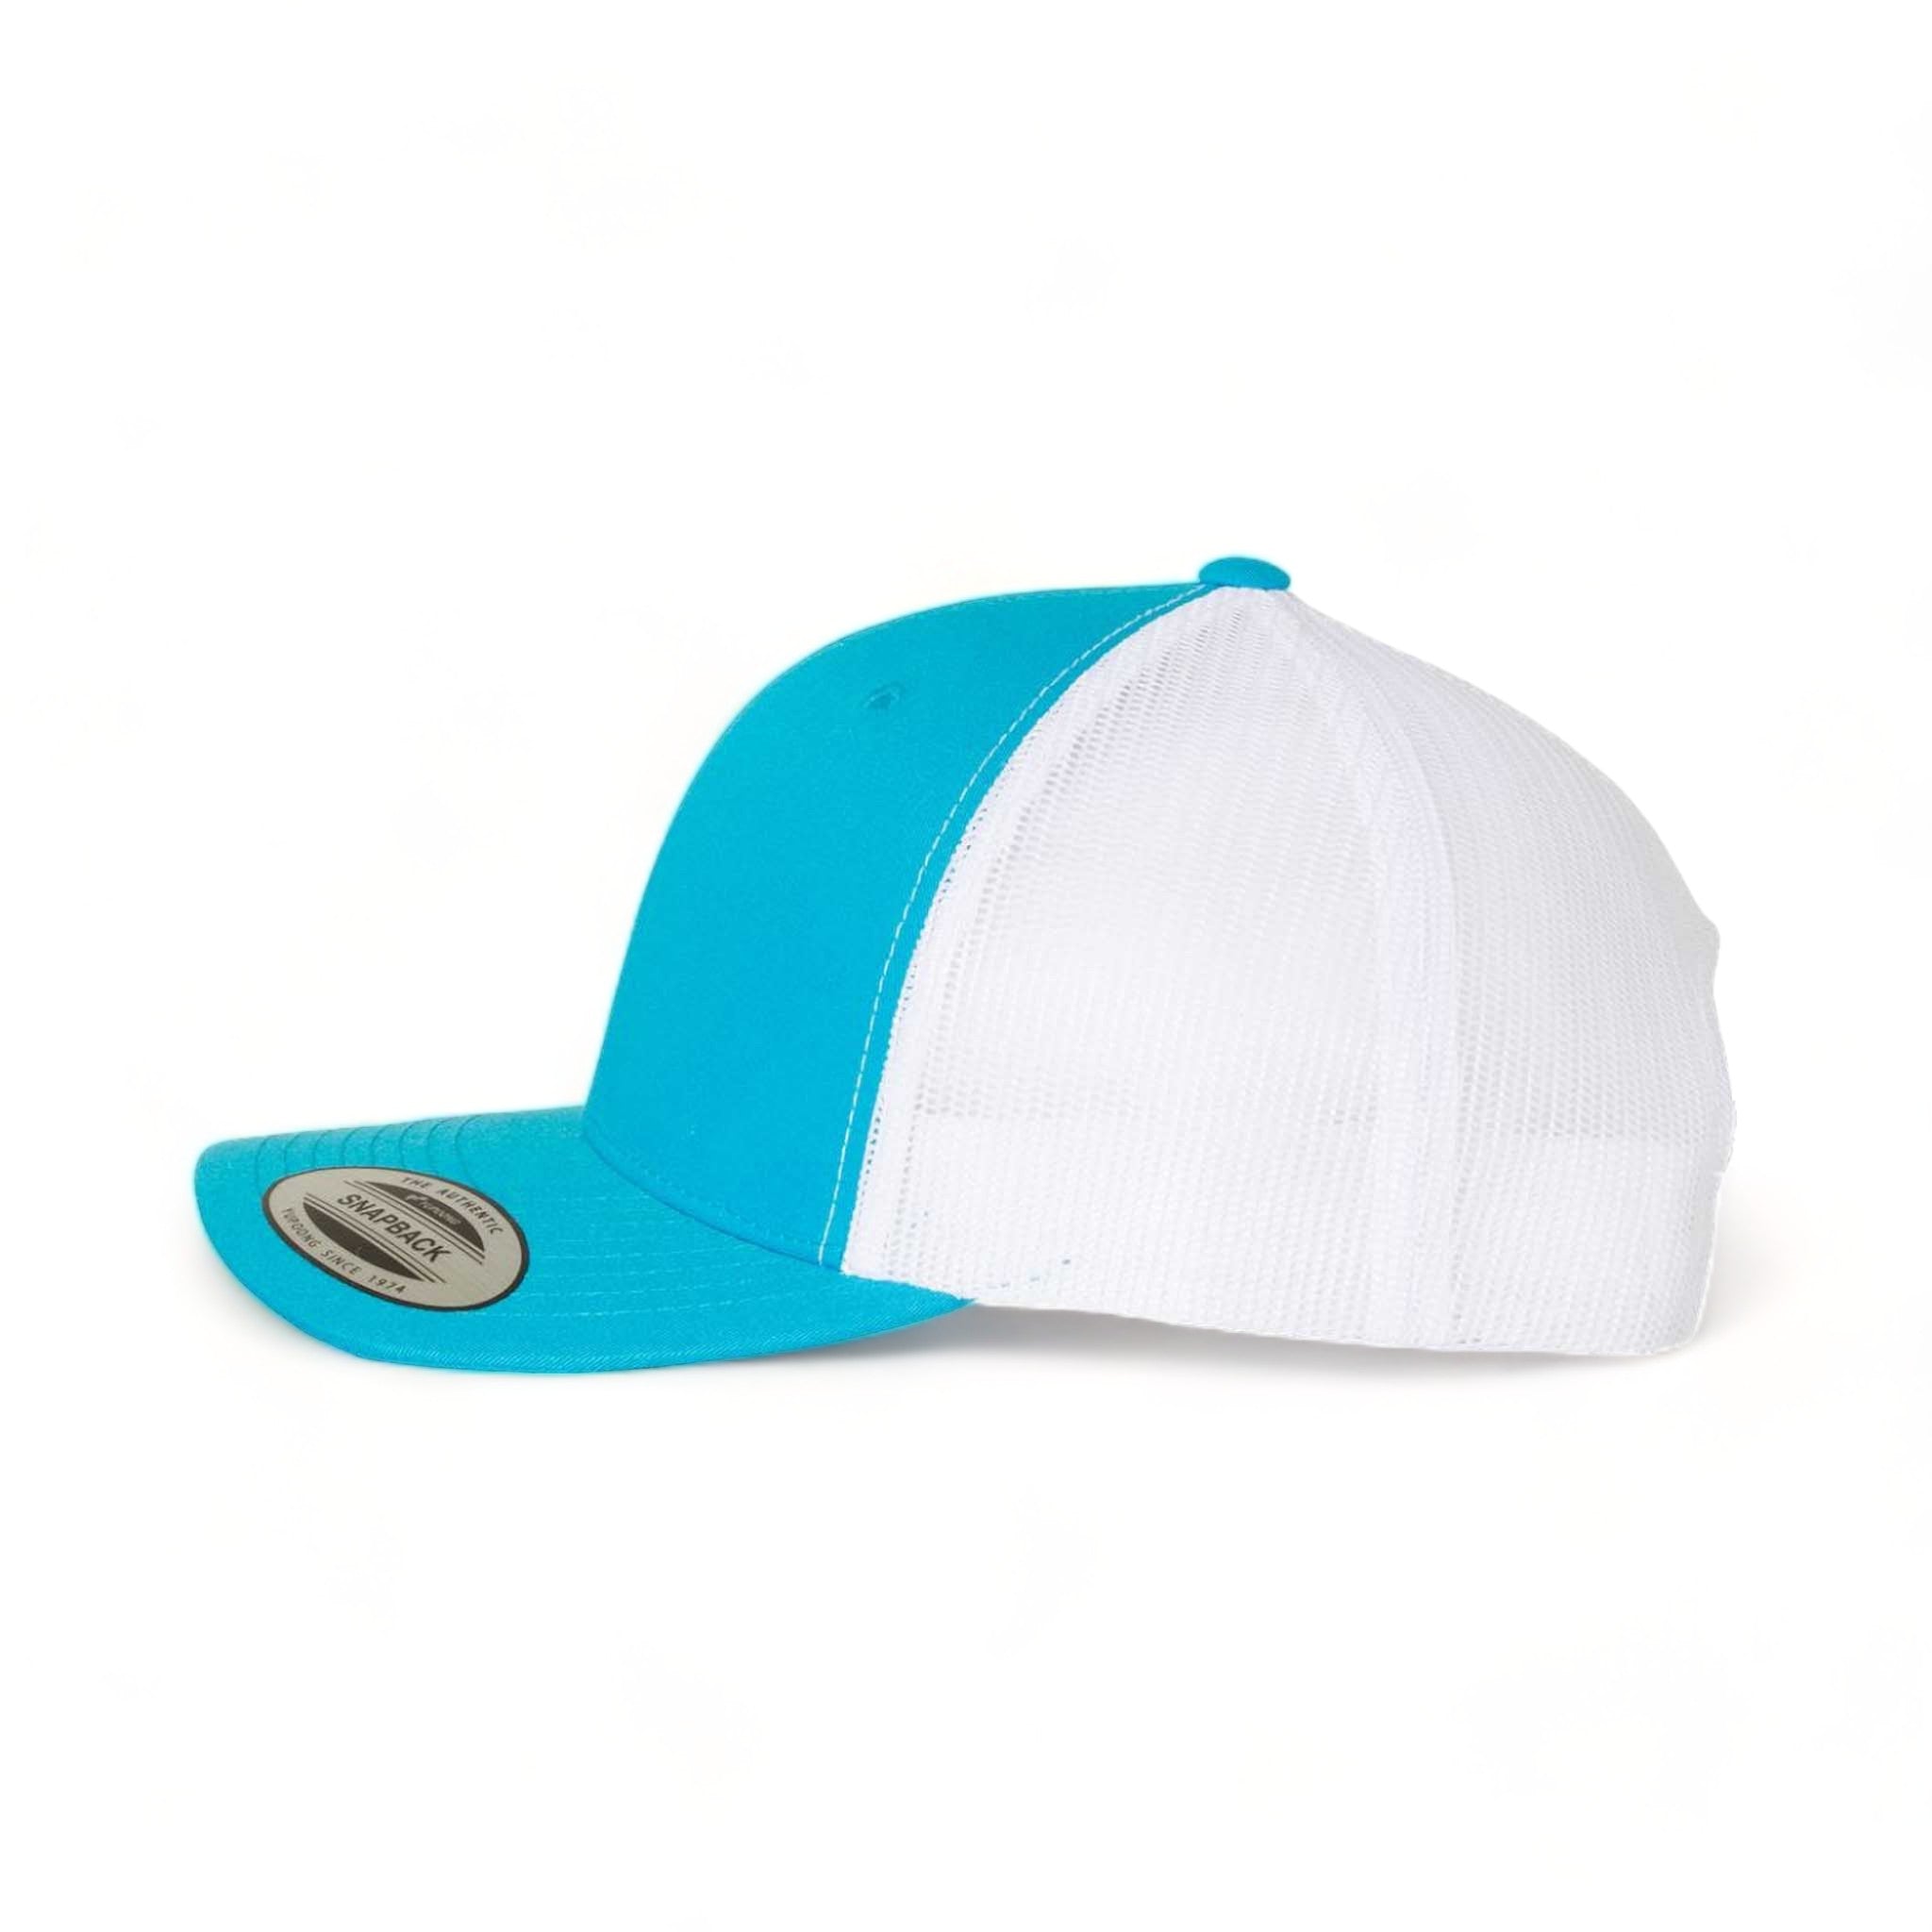 Side view of YP Classics 6606 custom hat in turquoise and white